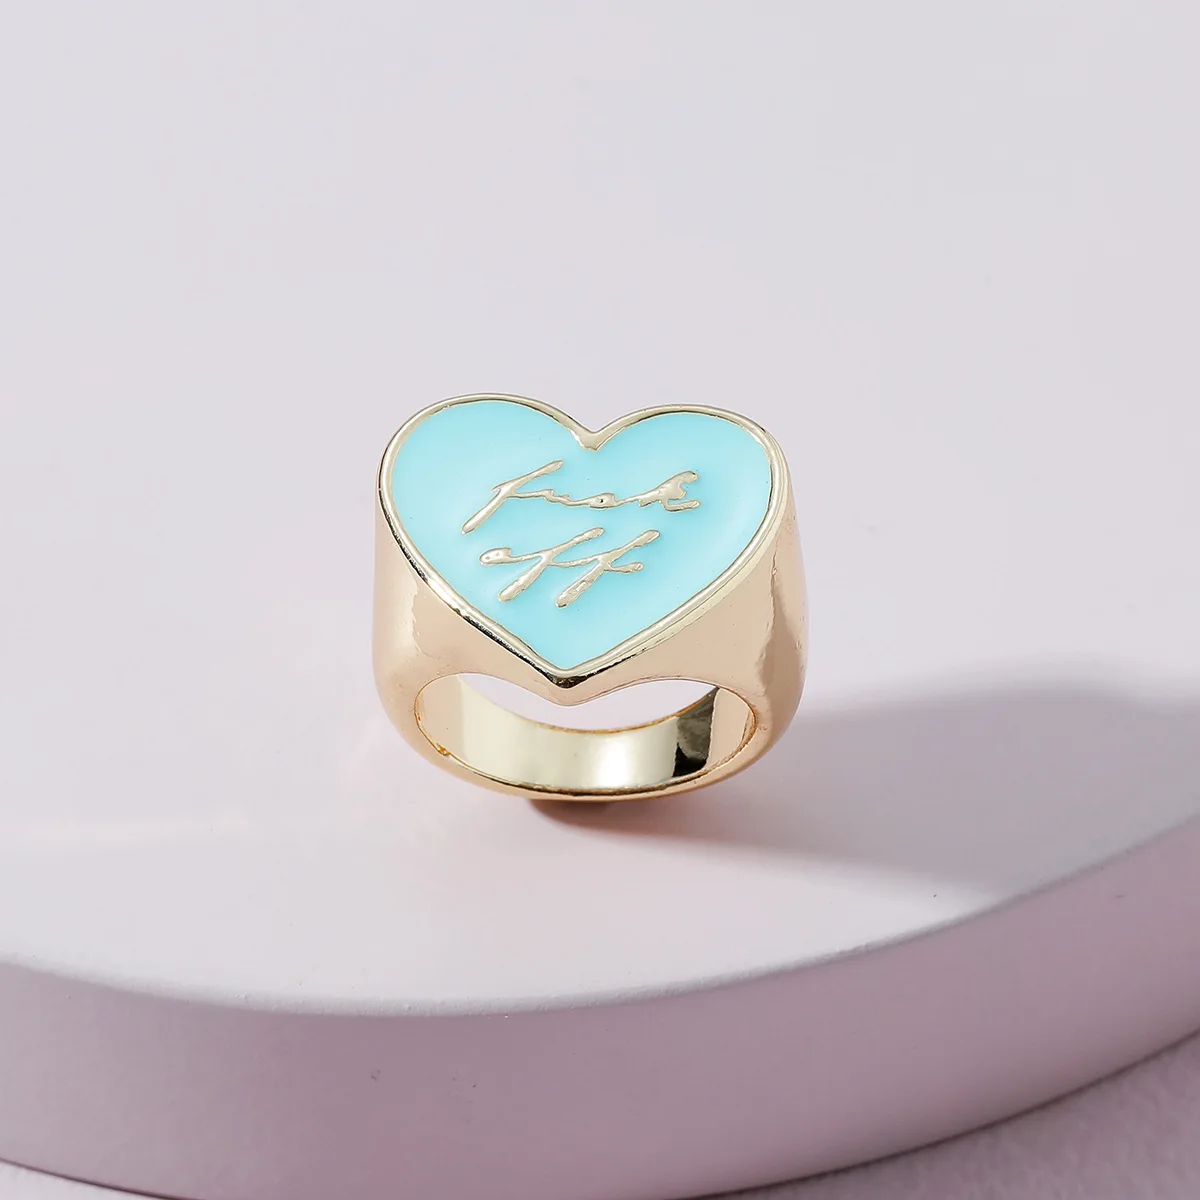 New Ins Vintage Color Cute Letter Heart Ring Simple Metal Drop Oil Heart Rings For Women Girls Fashion Jewelry Prezent